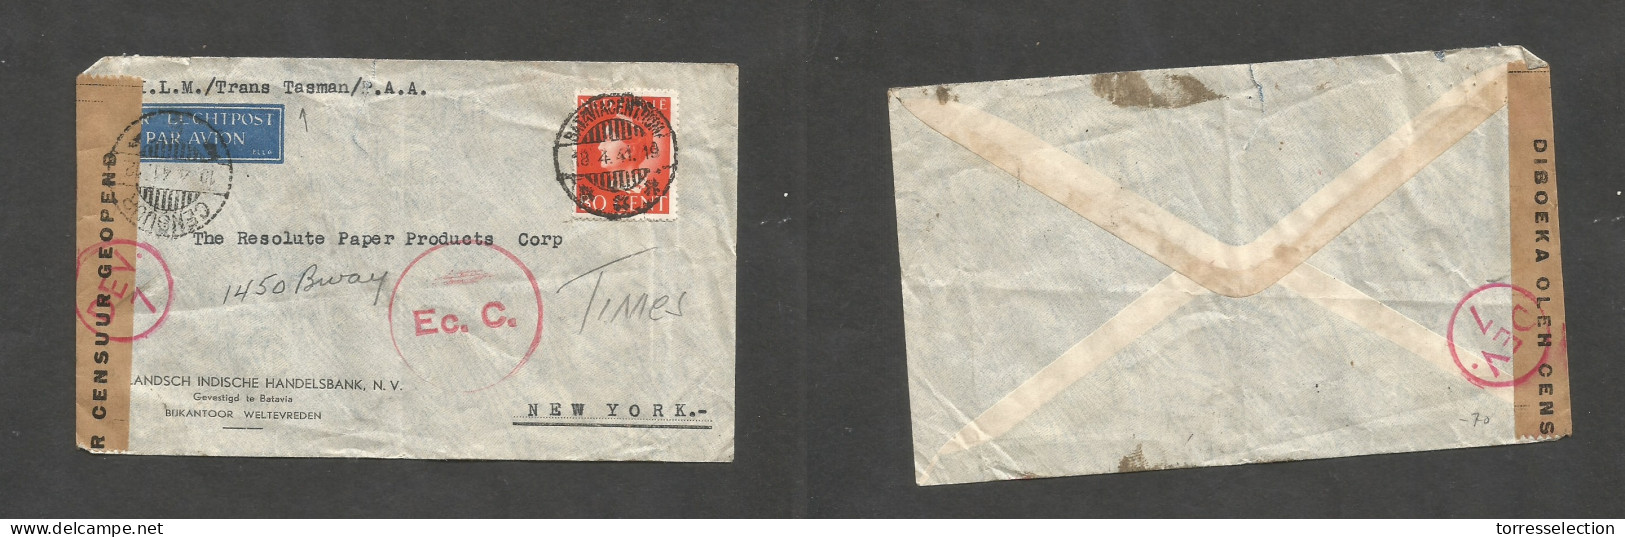 DUTCH INDIES. 1941 (18 April) Batavia - USA, NYC. Single 80c Red Fkd Comercial Envelope, WWII Censored Air Route KNILM / - India Holandeses